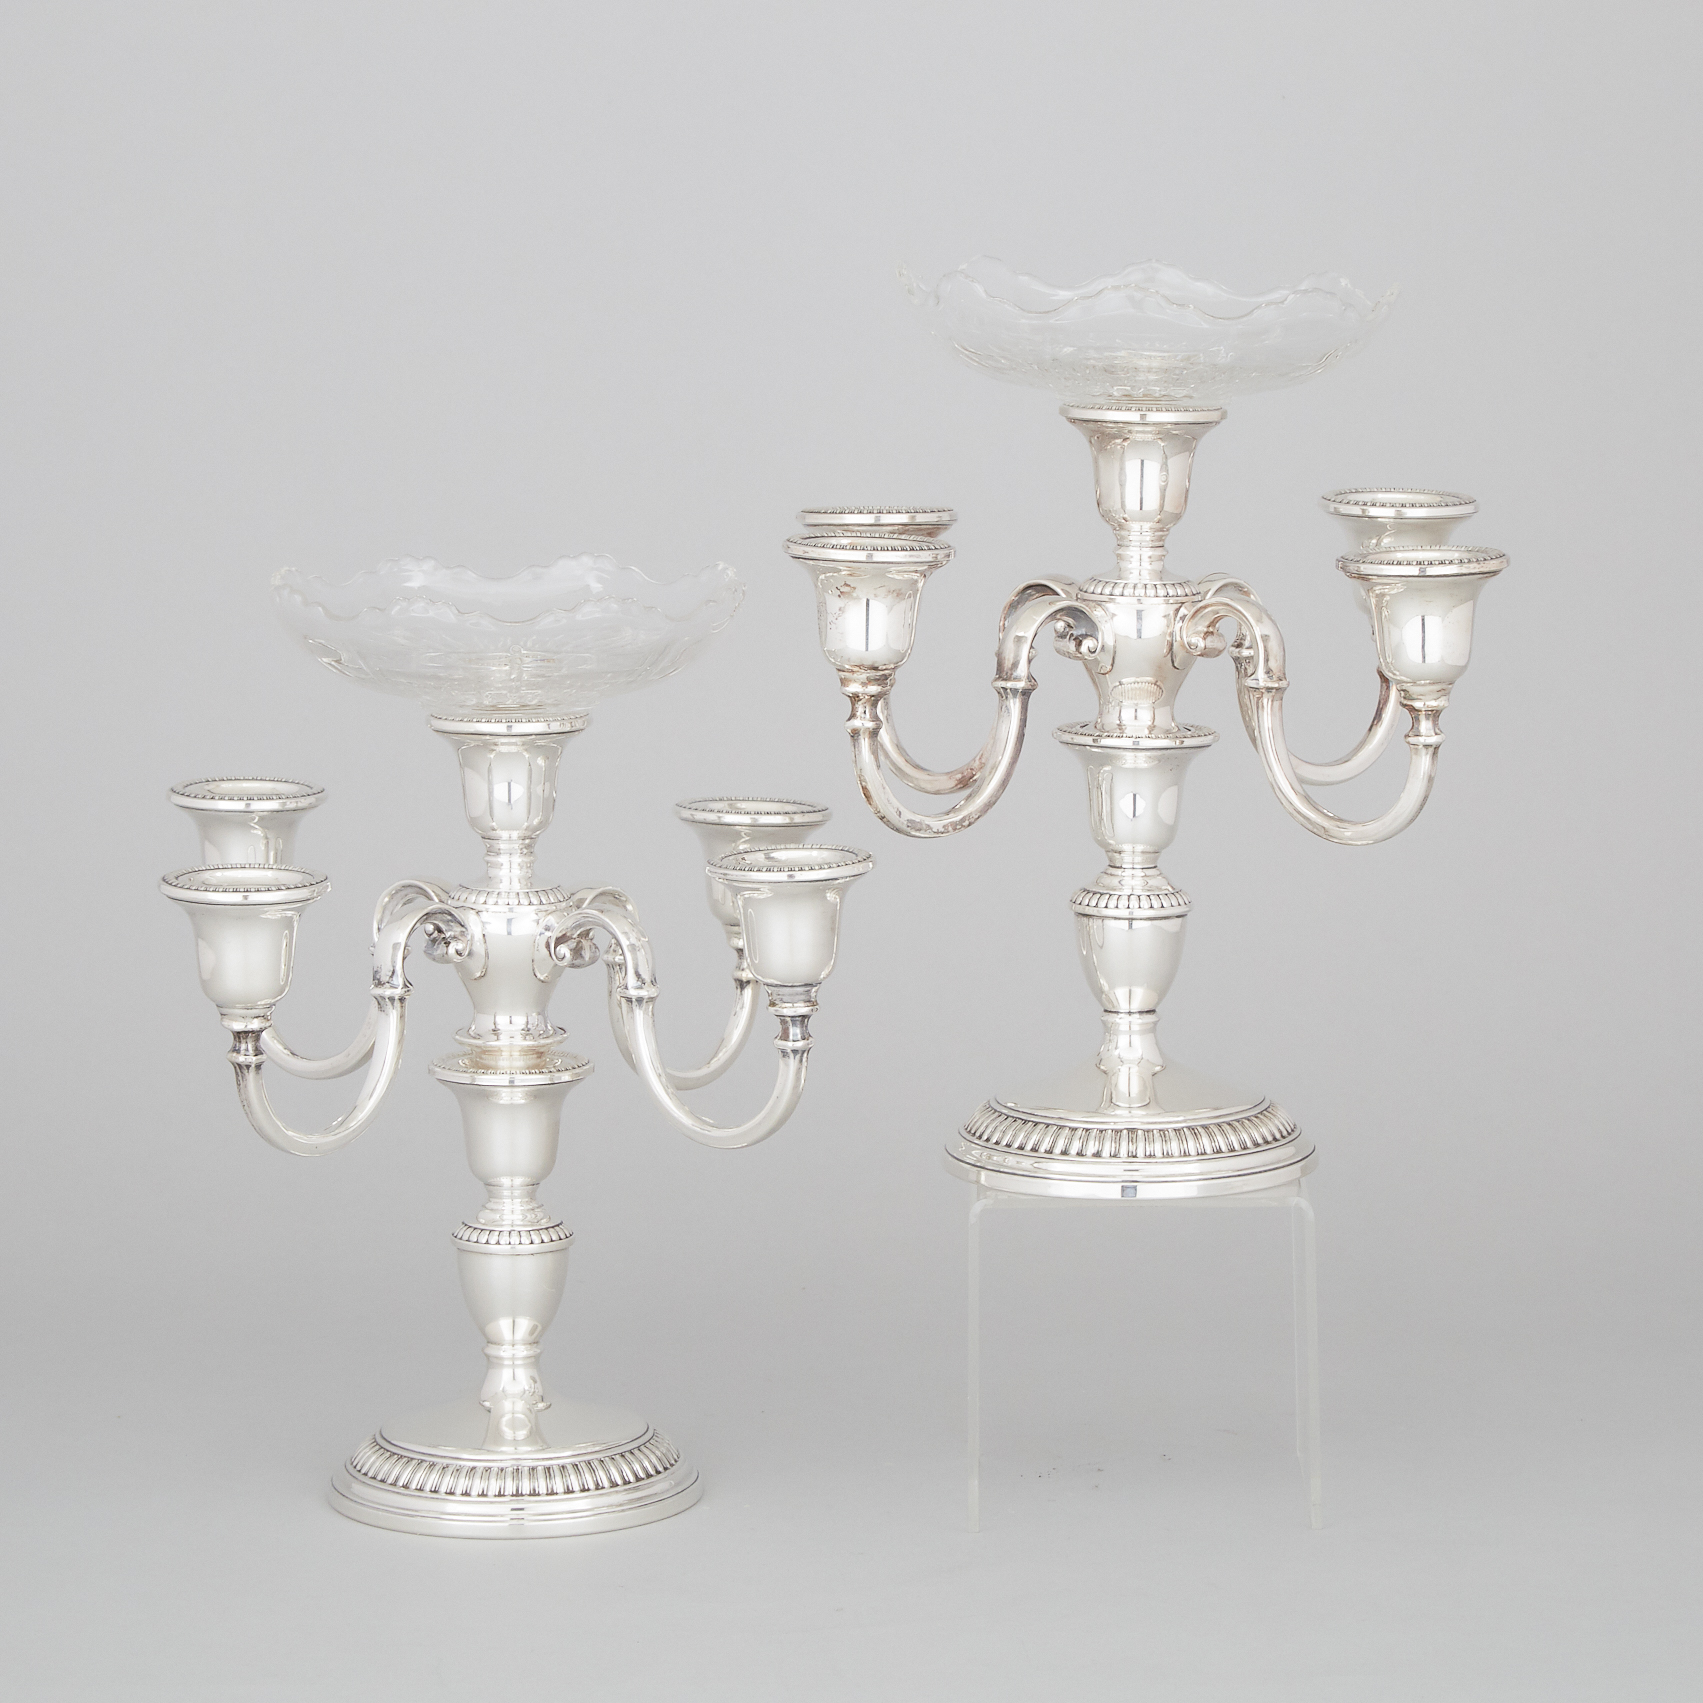 Pair of Canadian Silver Five-Light Candelabra, Henry Birks & Sons, Montreal, Que., 1947